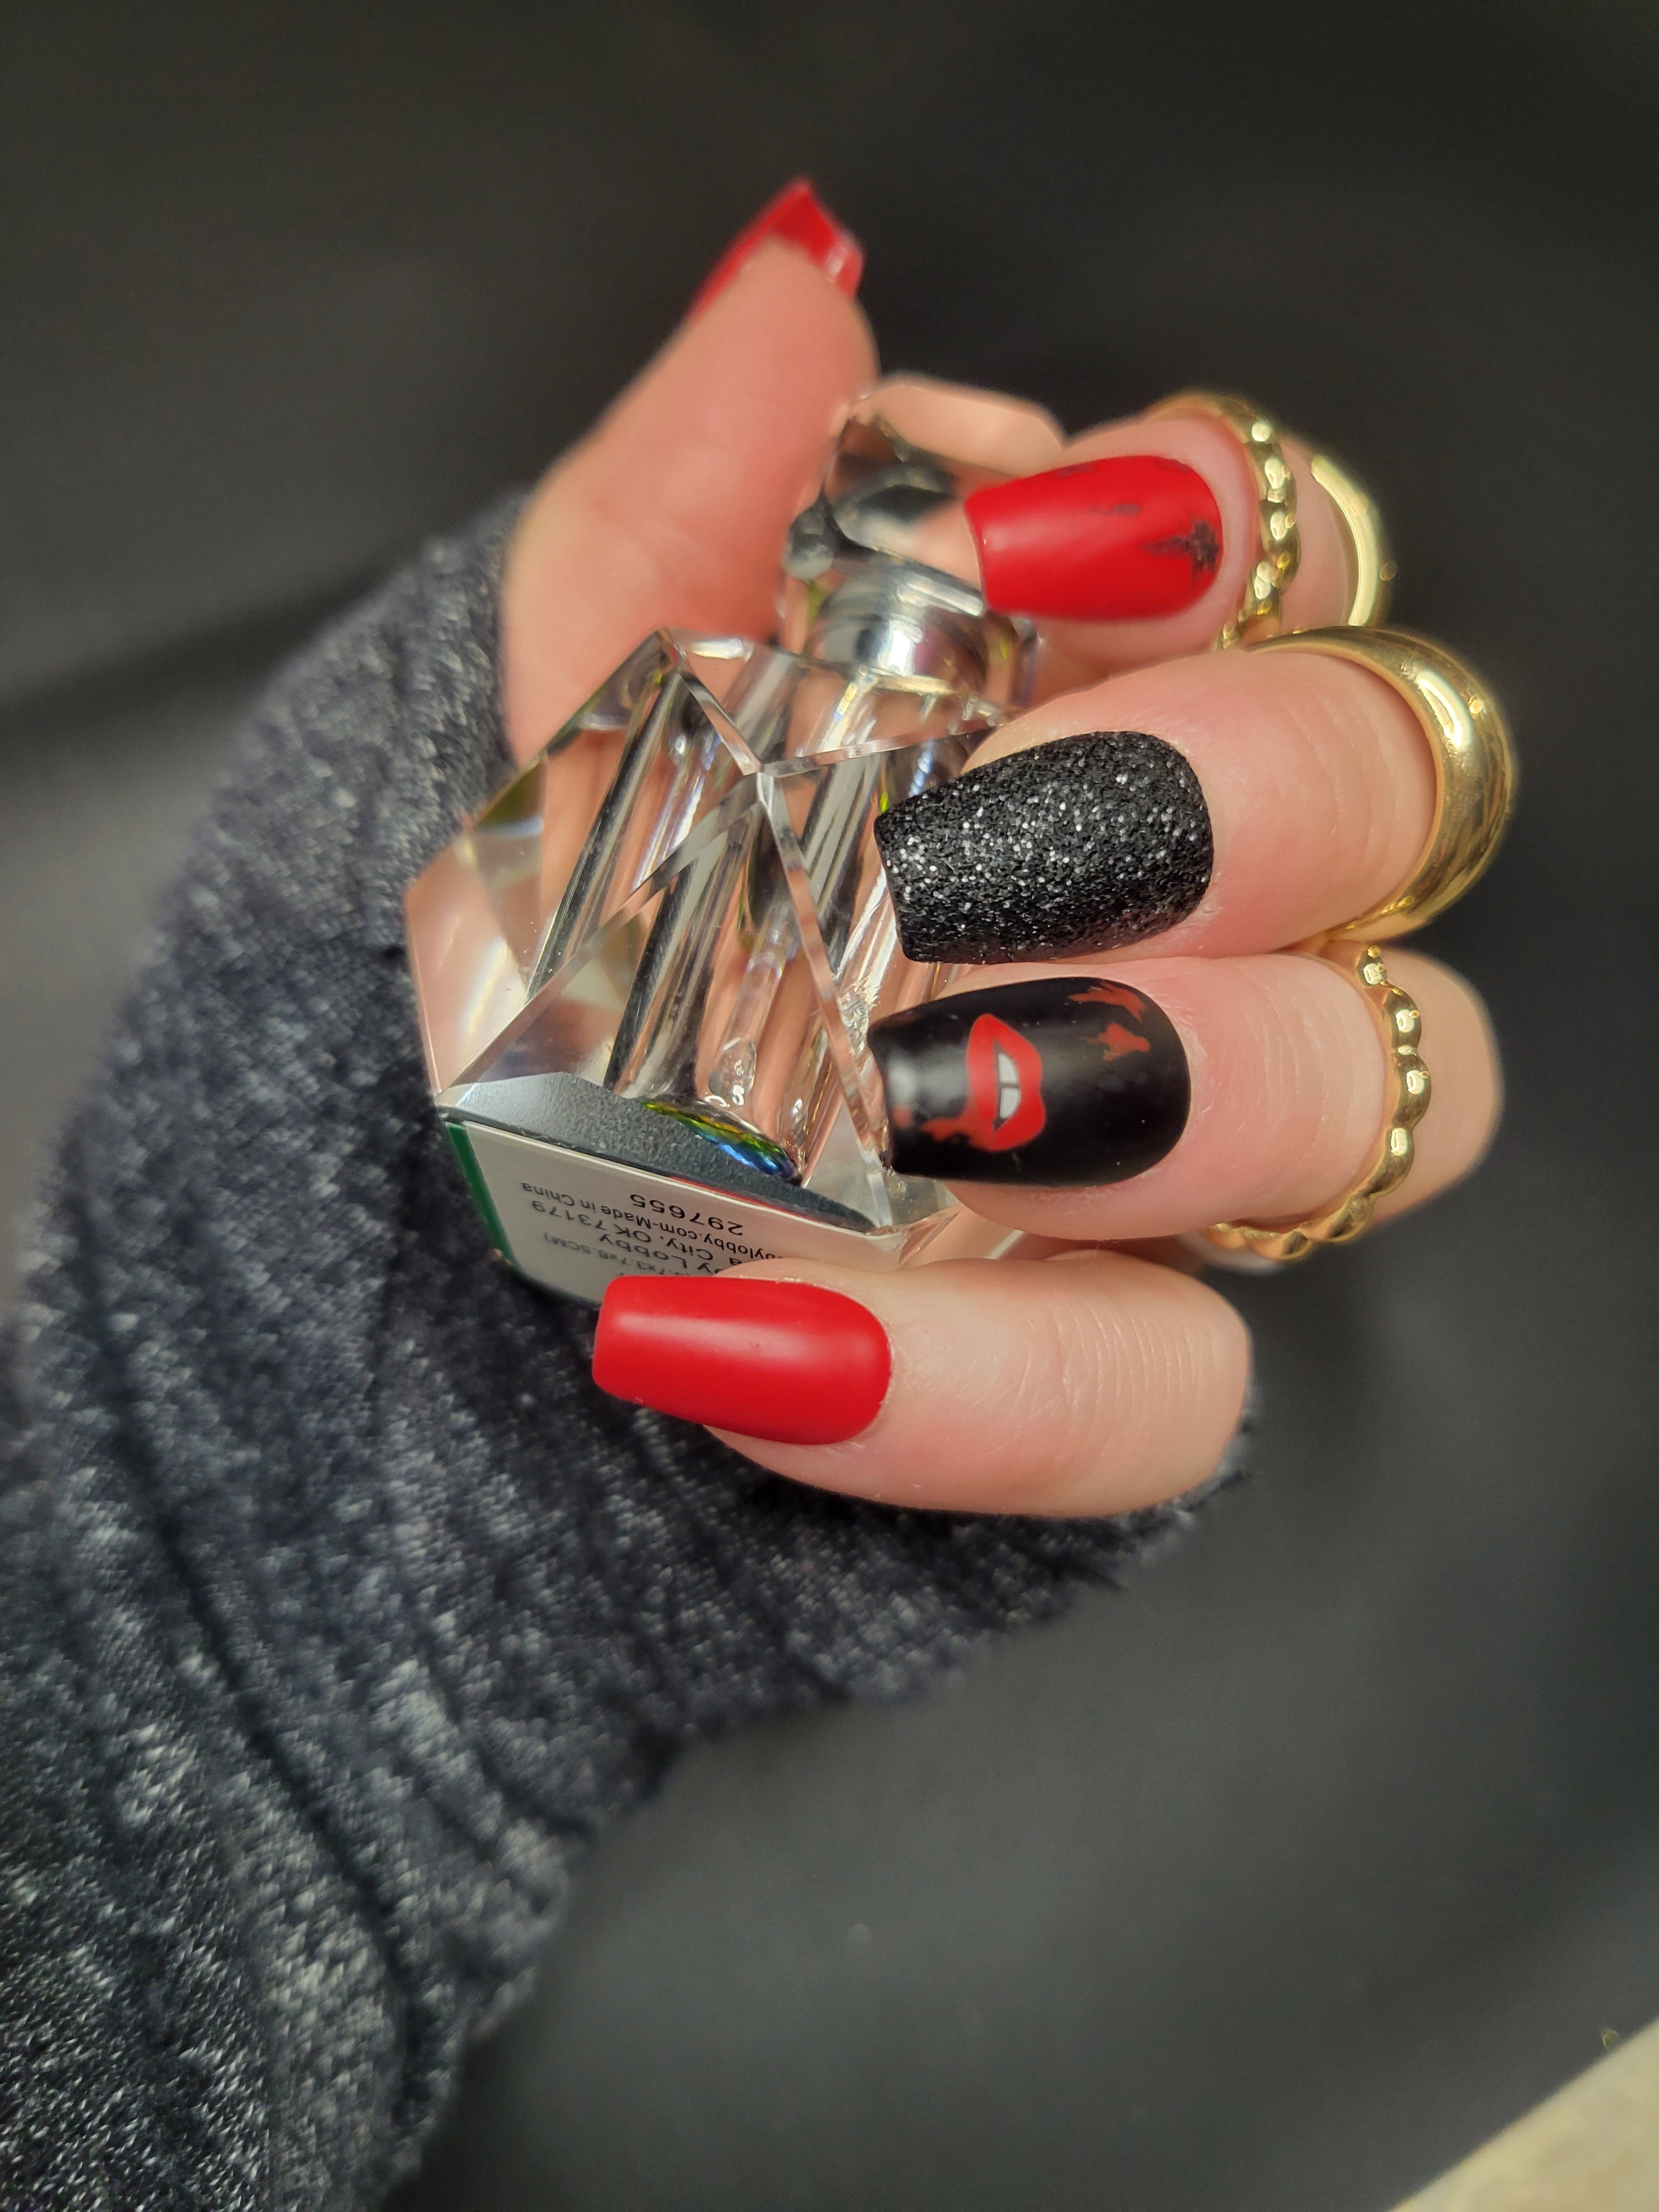 Red and Black Art Design on Nails. Stock Image - Image of glitter,  modeling: 49825021